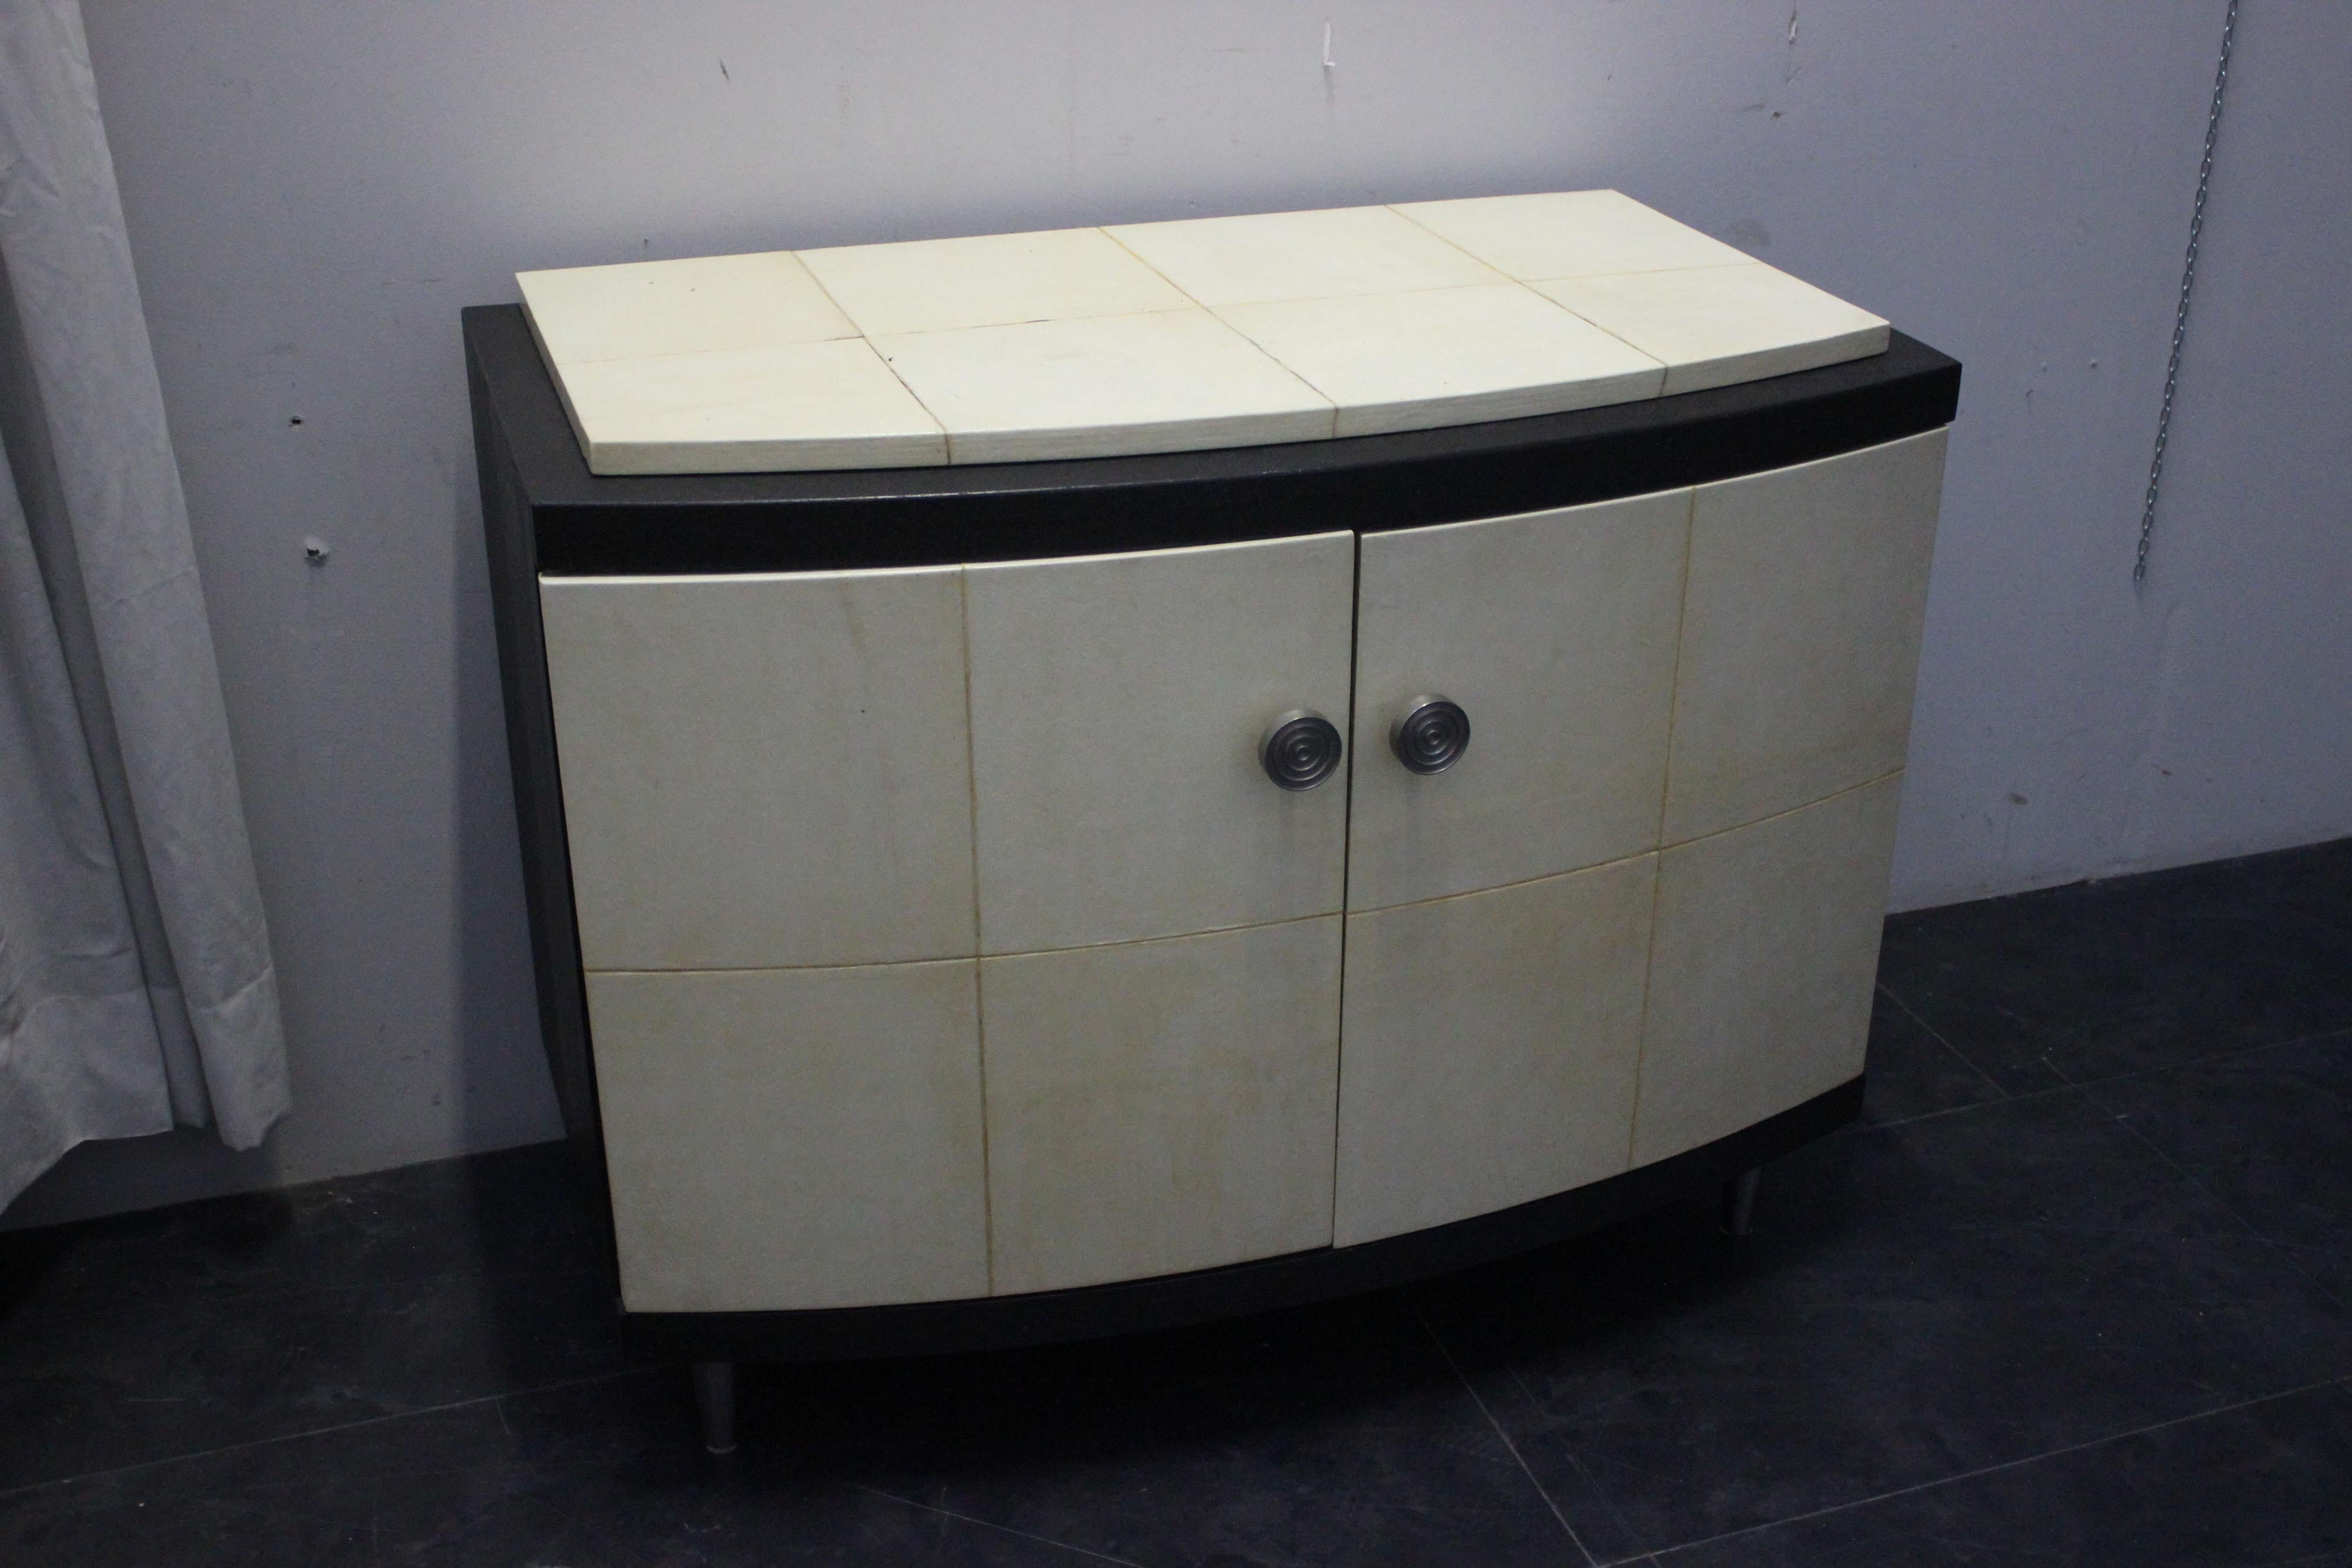 Art deco style sideboard built in 1970 in wenghè wood.
Curved on the front, doors and top lined in parchment.
Steel tips and handles.
Packaging with bubble wrap and cardboard boxes is included. If the wooden packaging is needed (fumigated crates